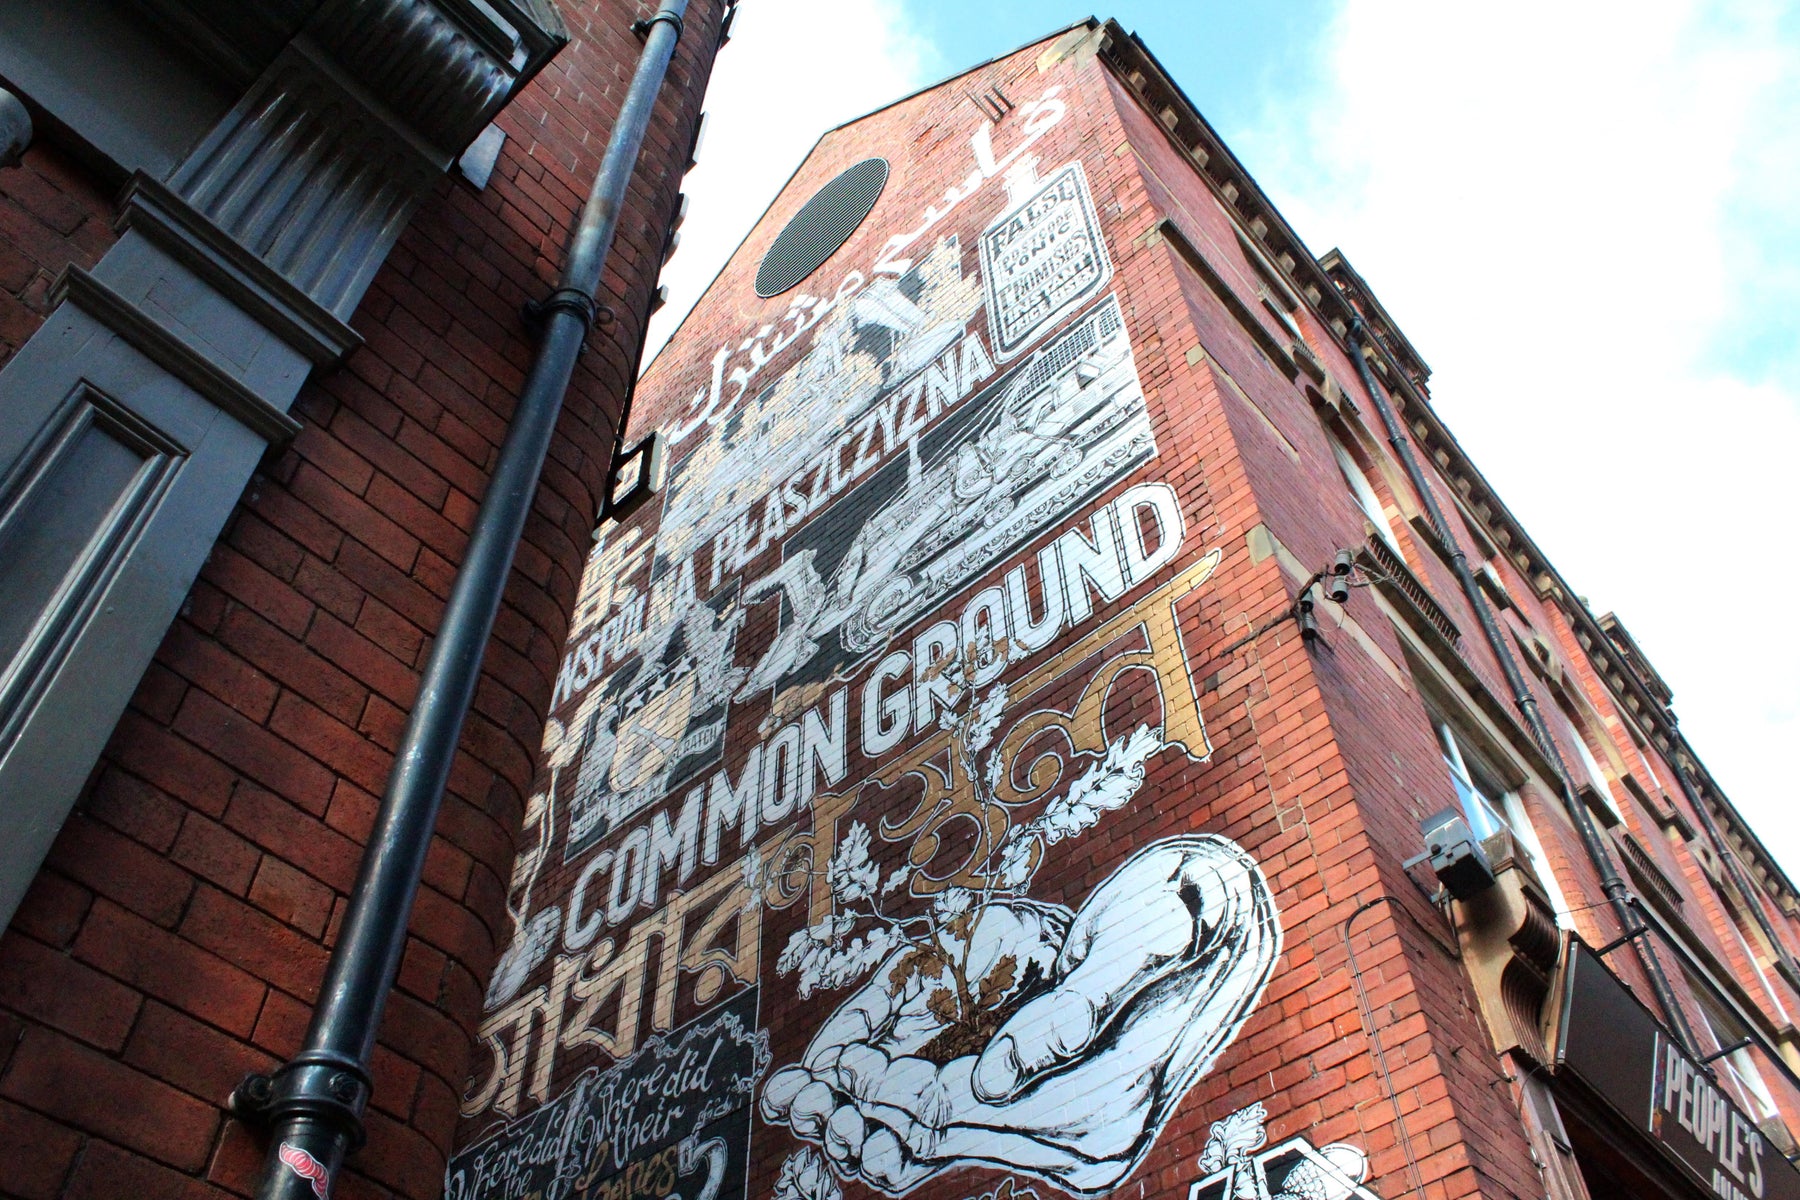 Common Ground: A Mural by Mike Winnard that Explores the History of Kirkgate